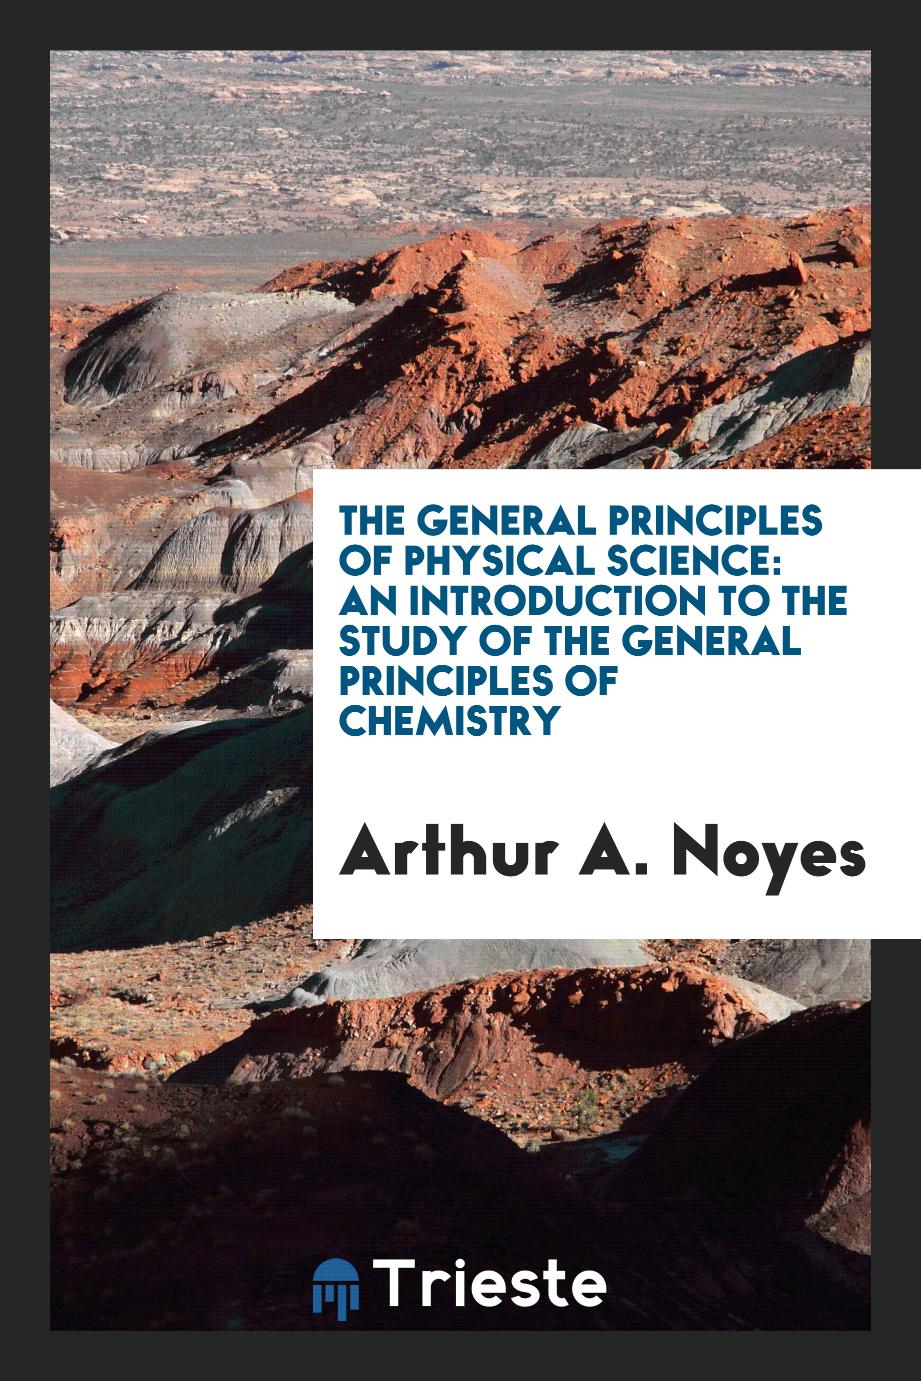 The General Principles of Physical Science: An Introduction to the Study of the General Principles of Chemistry